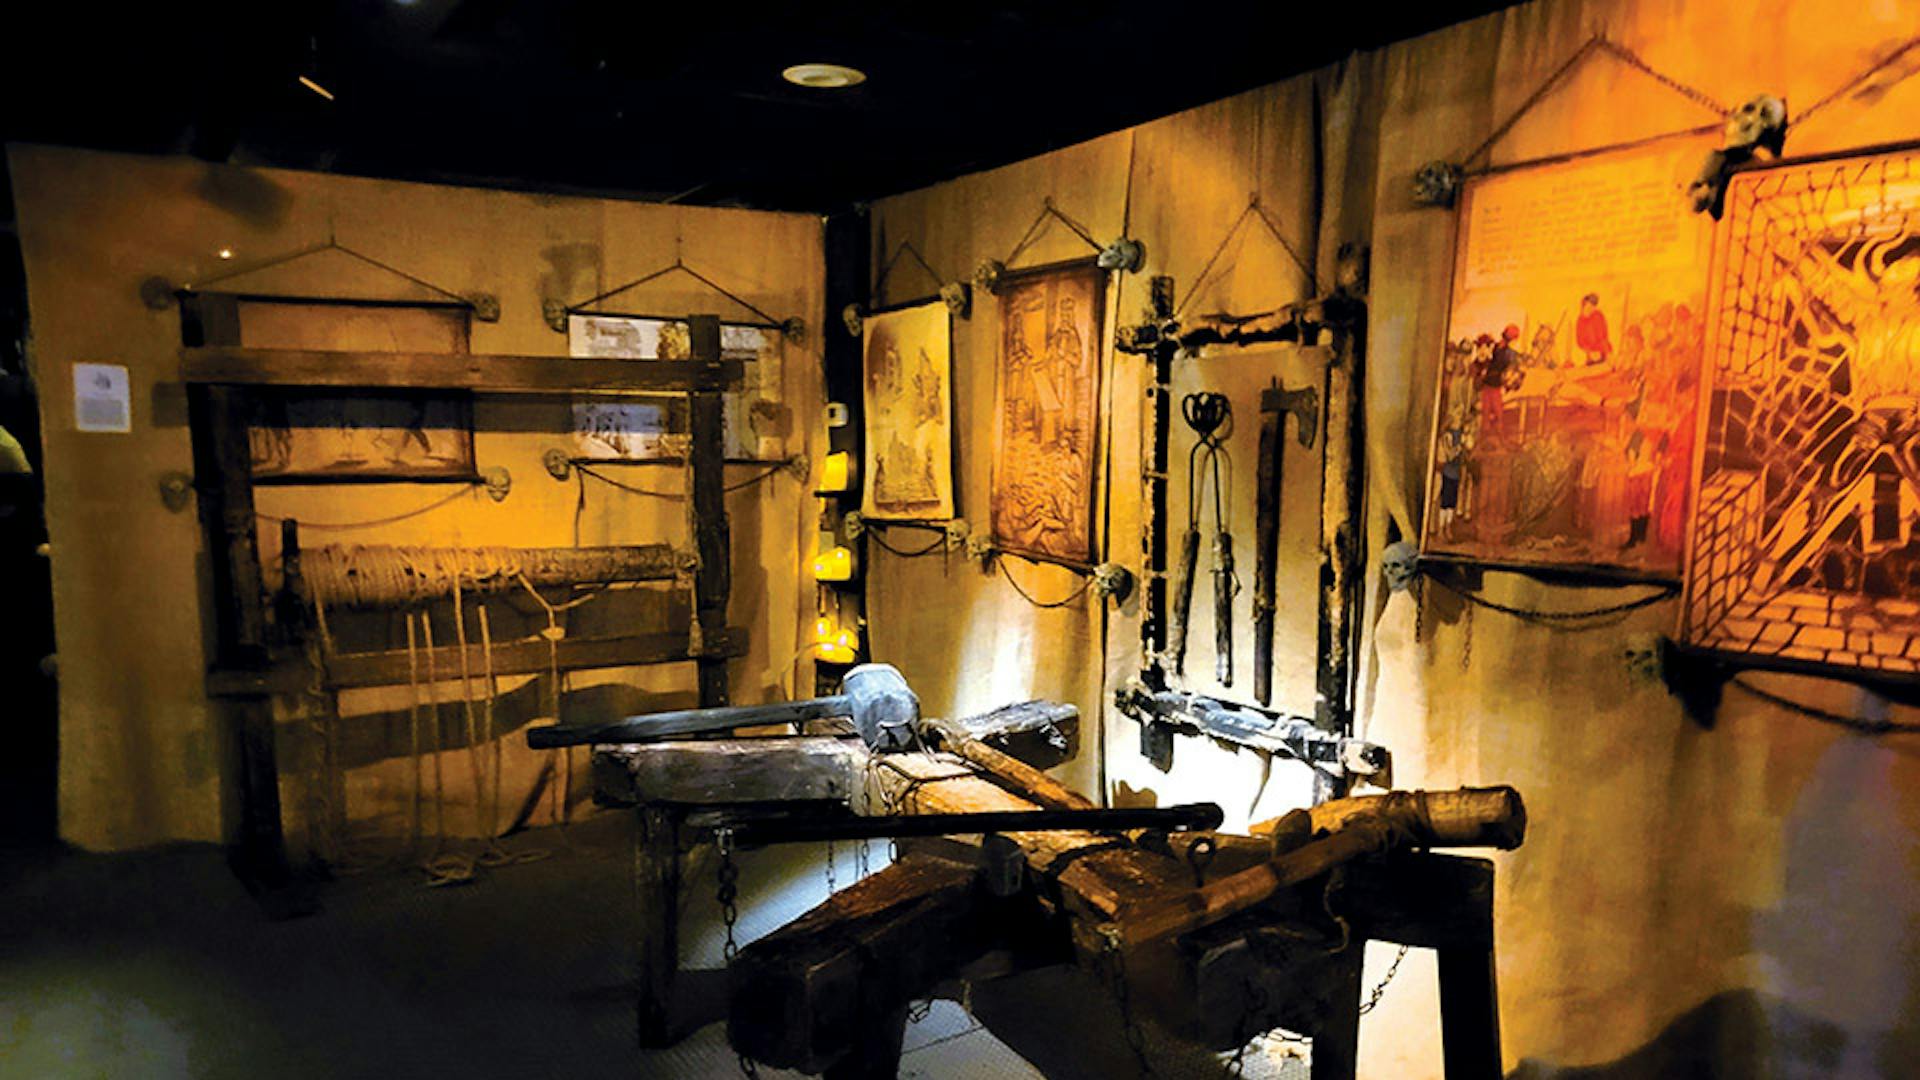 Torture instruments at the Medieval Torture Museum in Chicago, Illinois (photo courtesy of Medieval Torture Museum)